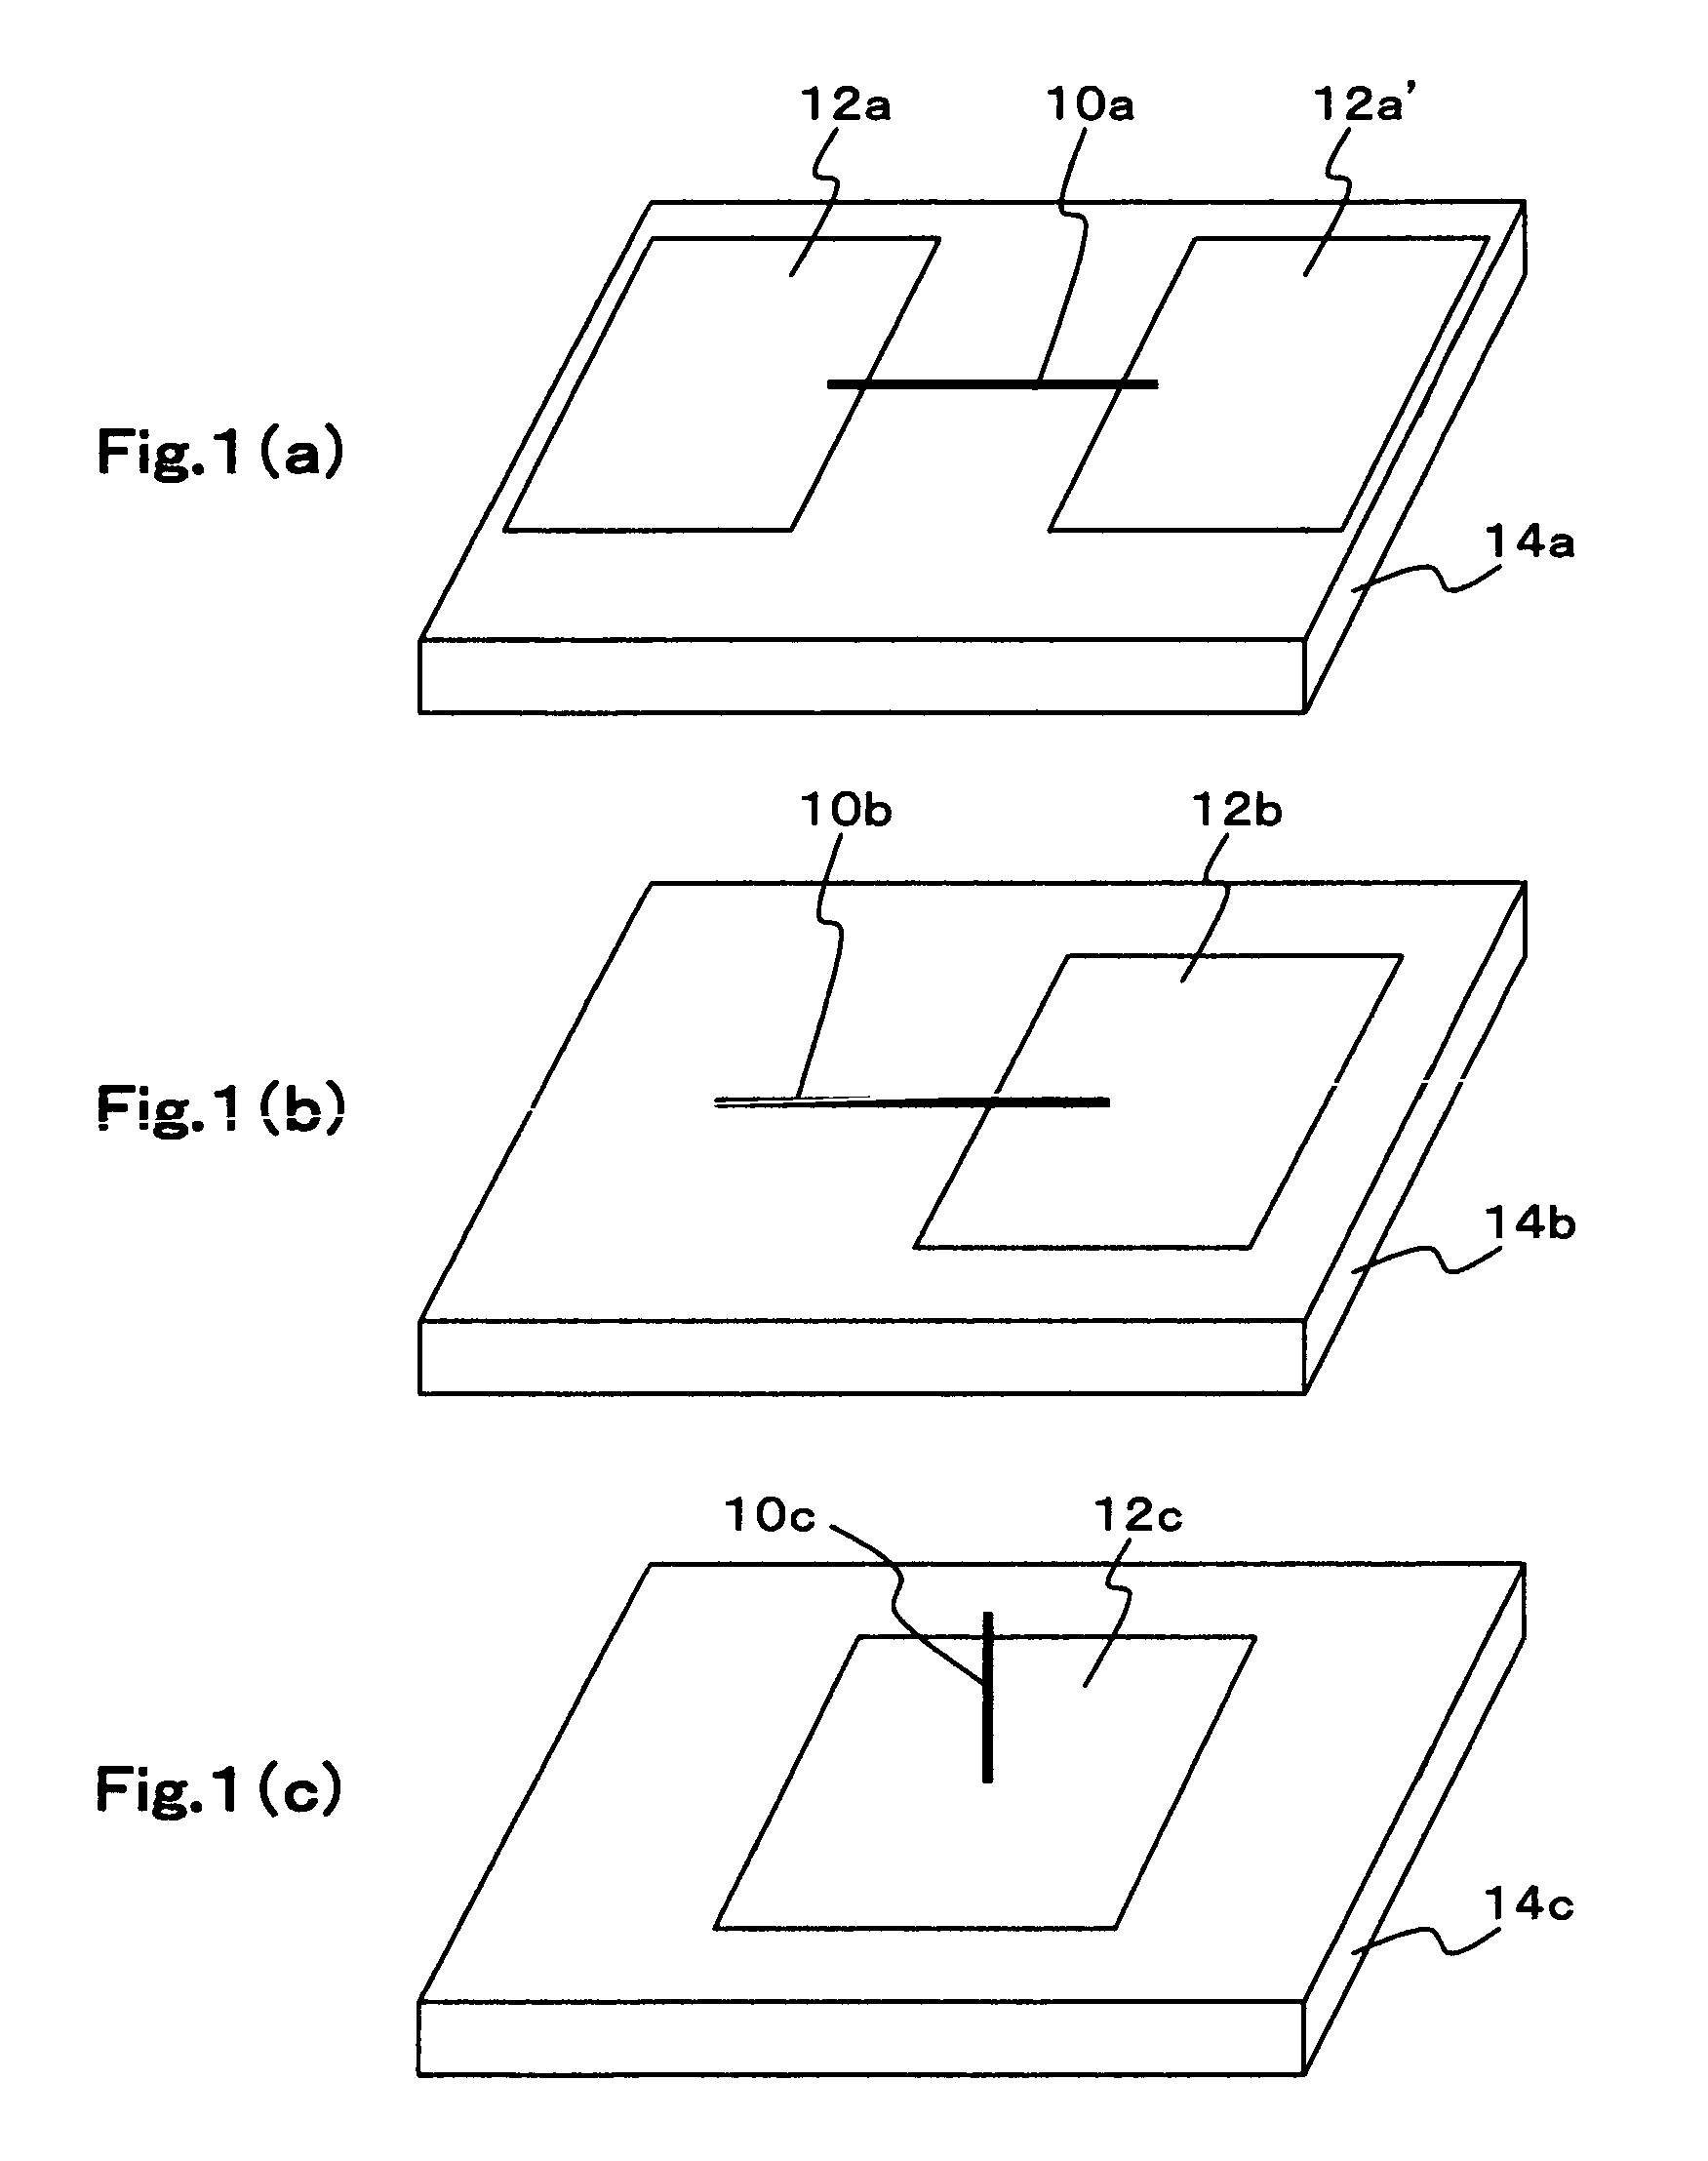 Antenna and communication device